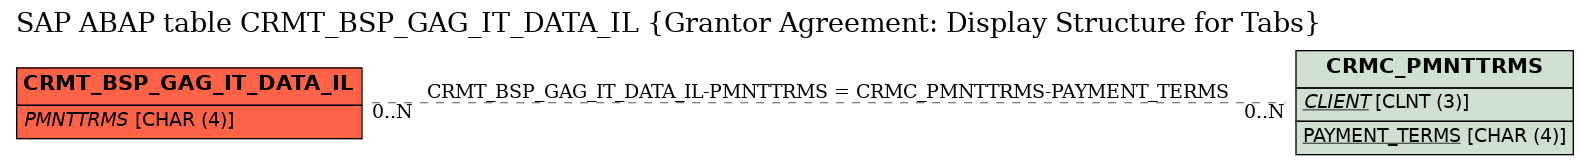 E-R Diagram for table CRMT_BSP_GAG_IT_DATA_IL (Grantor Agreement: Display Structure for Tabs)